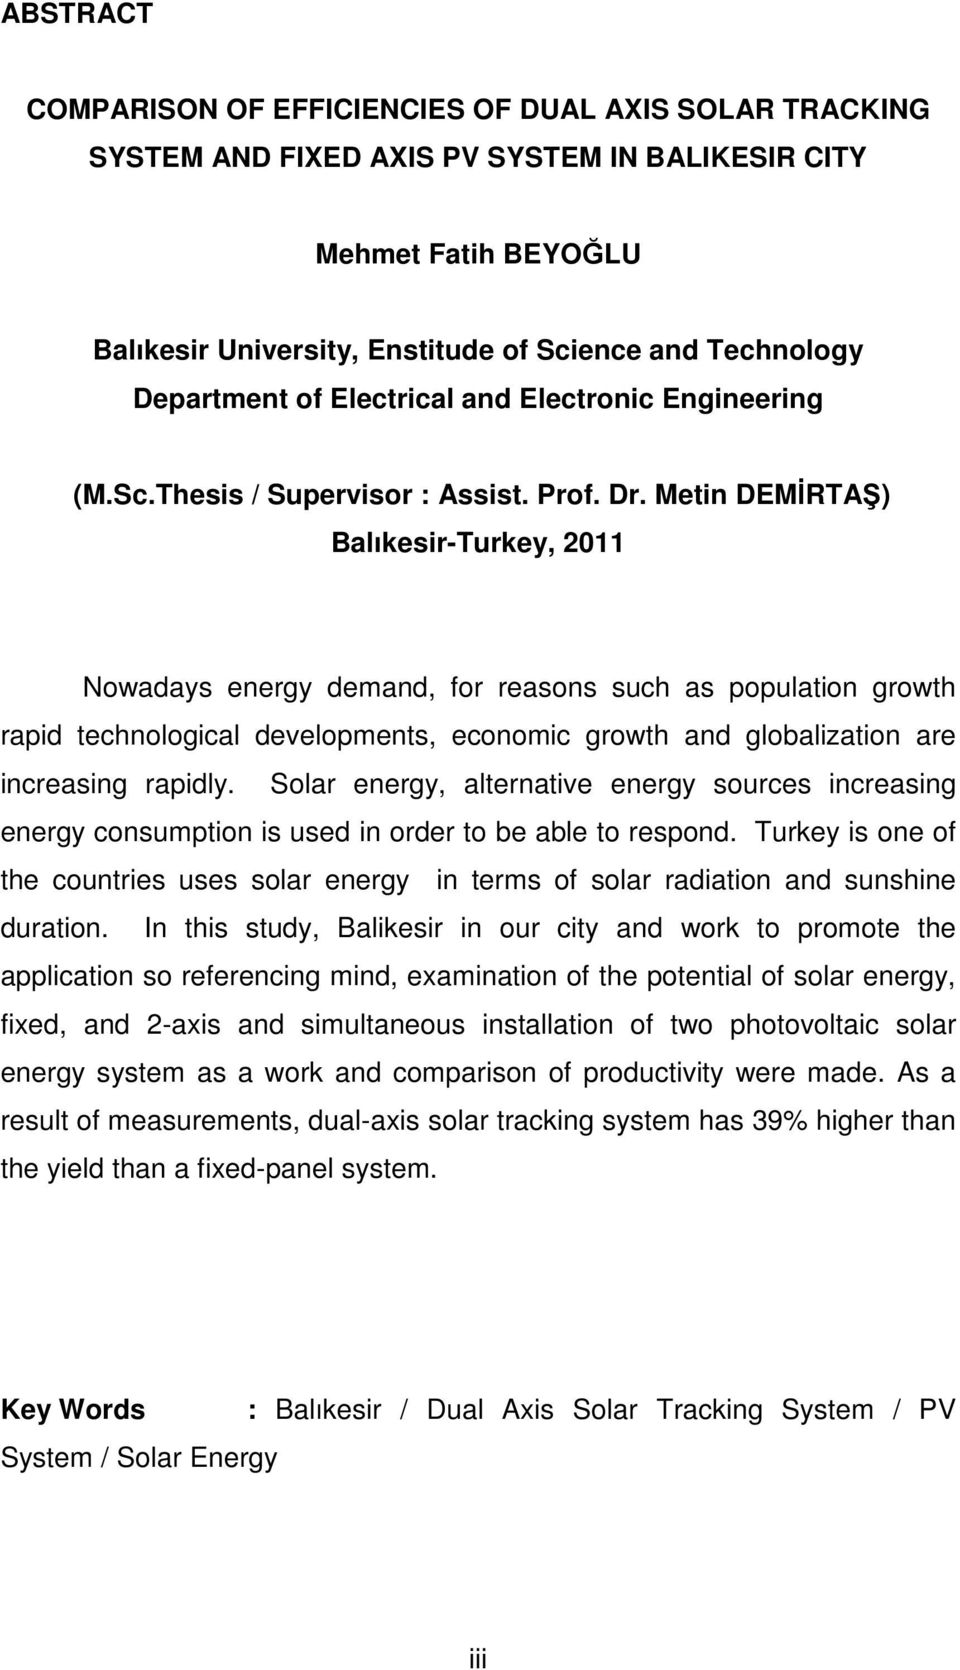 Metin DEMİRTAŞ) Balıkesir-Turkey, 2011 Nowadays energy demand, for reasons such as population growth rapid technological developments, economic growth and globalization are increasing rapidly.